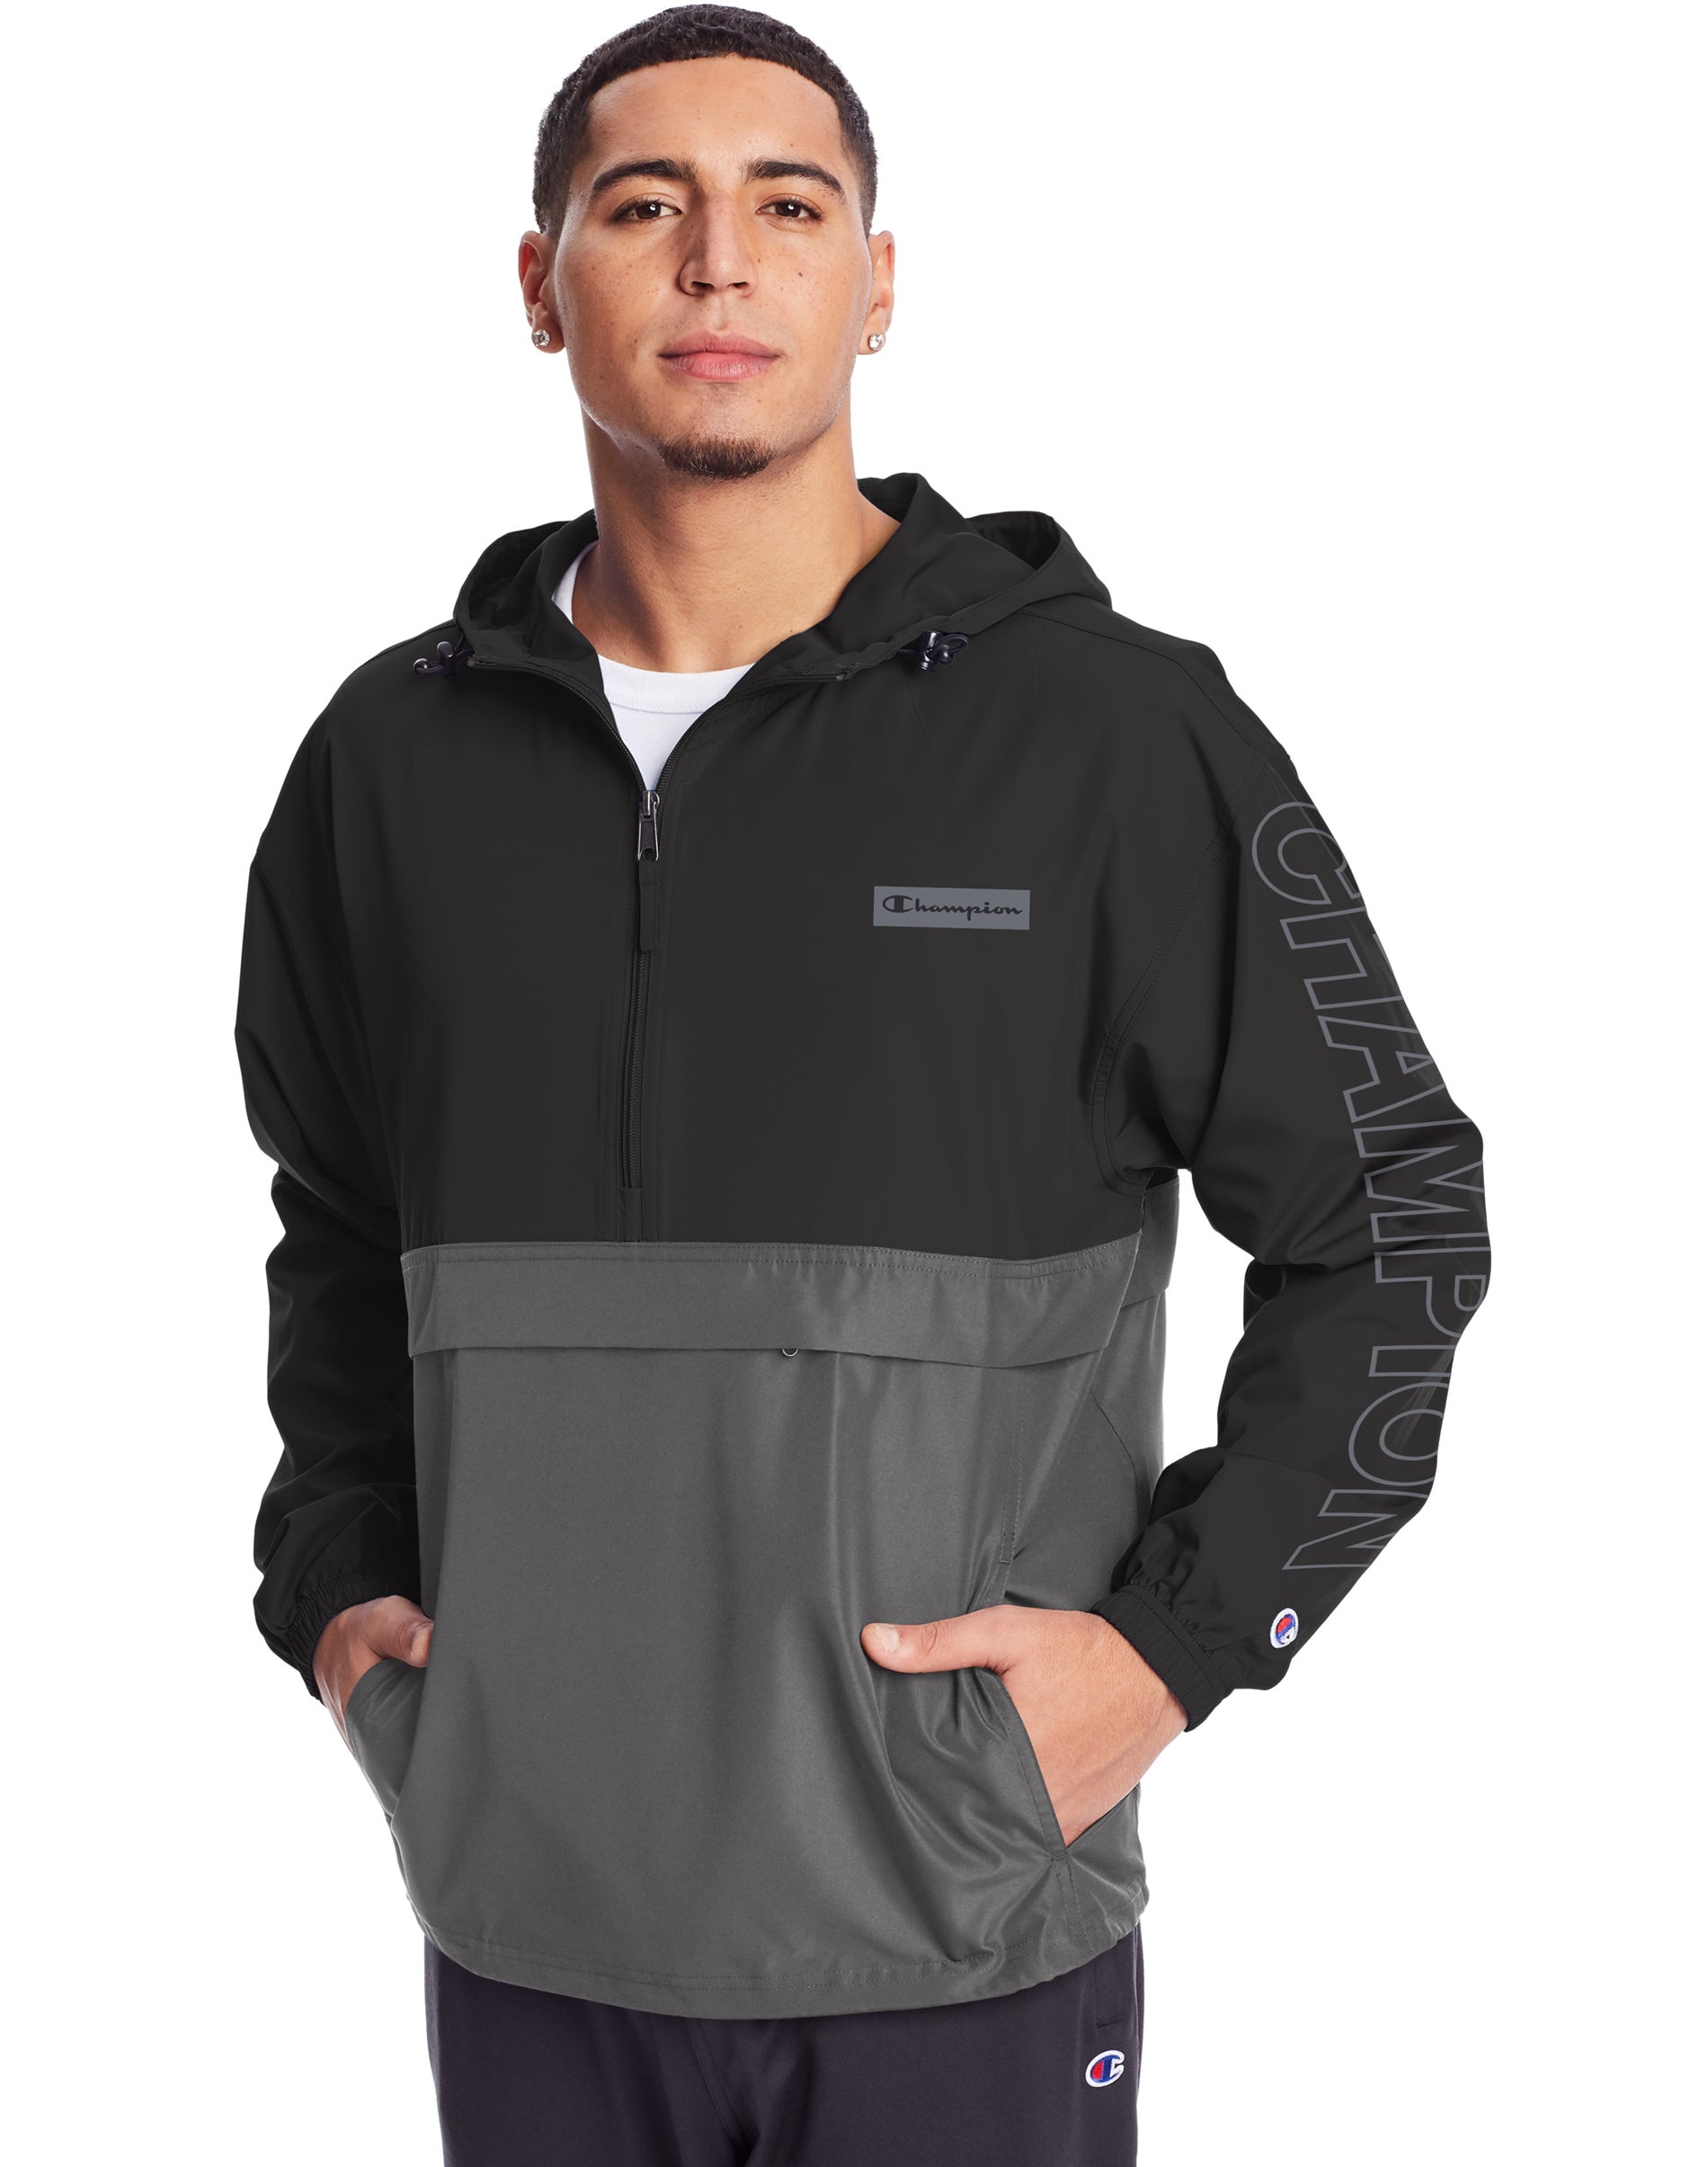 Champion Men's Stadium Colorblock Packable Jacket $13.49,  Men's Reverse Weave Contrast Stitching Hoodie $15, Powerblend Fleece Joggers $13.49, More + free shipping